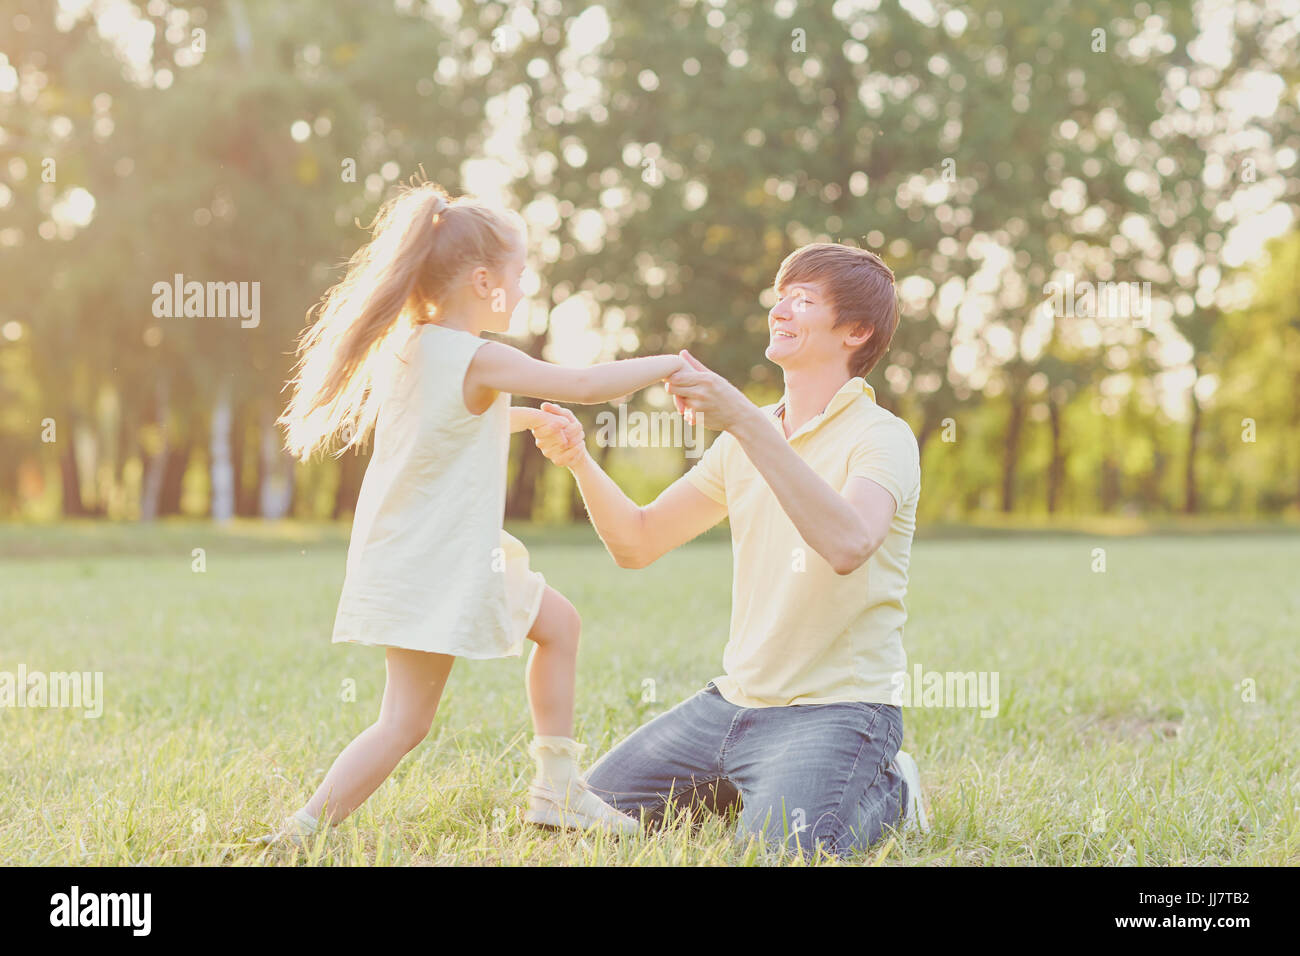 Dad is playing with his daughter on in the park. Stock Photo